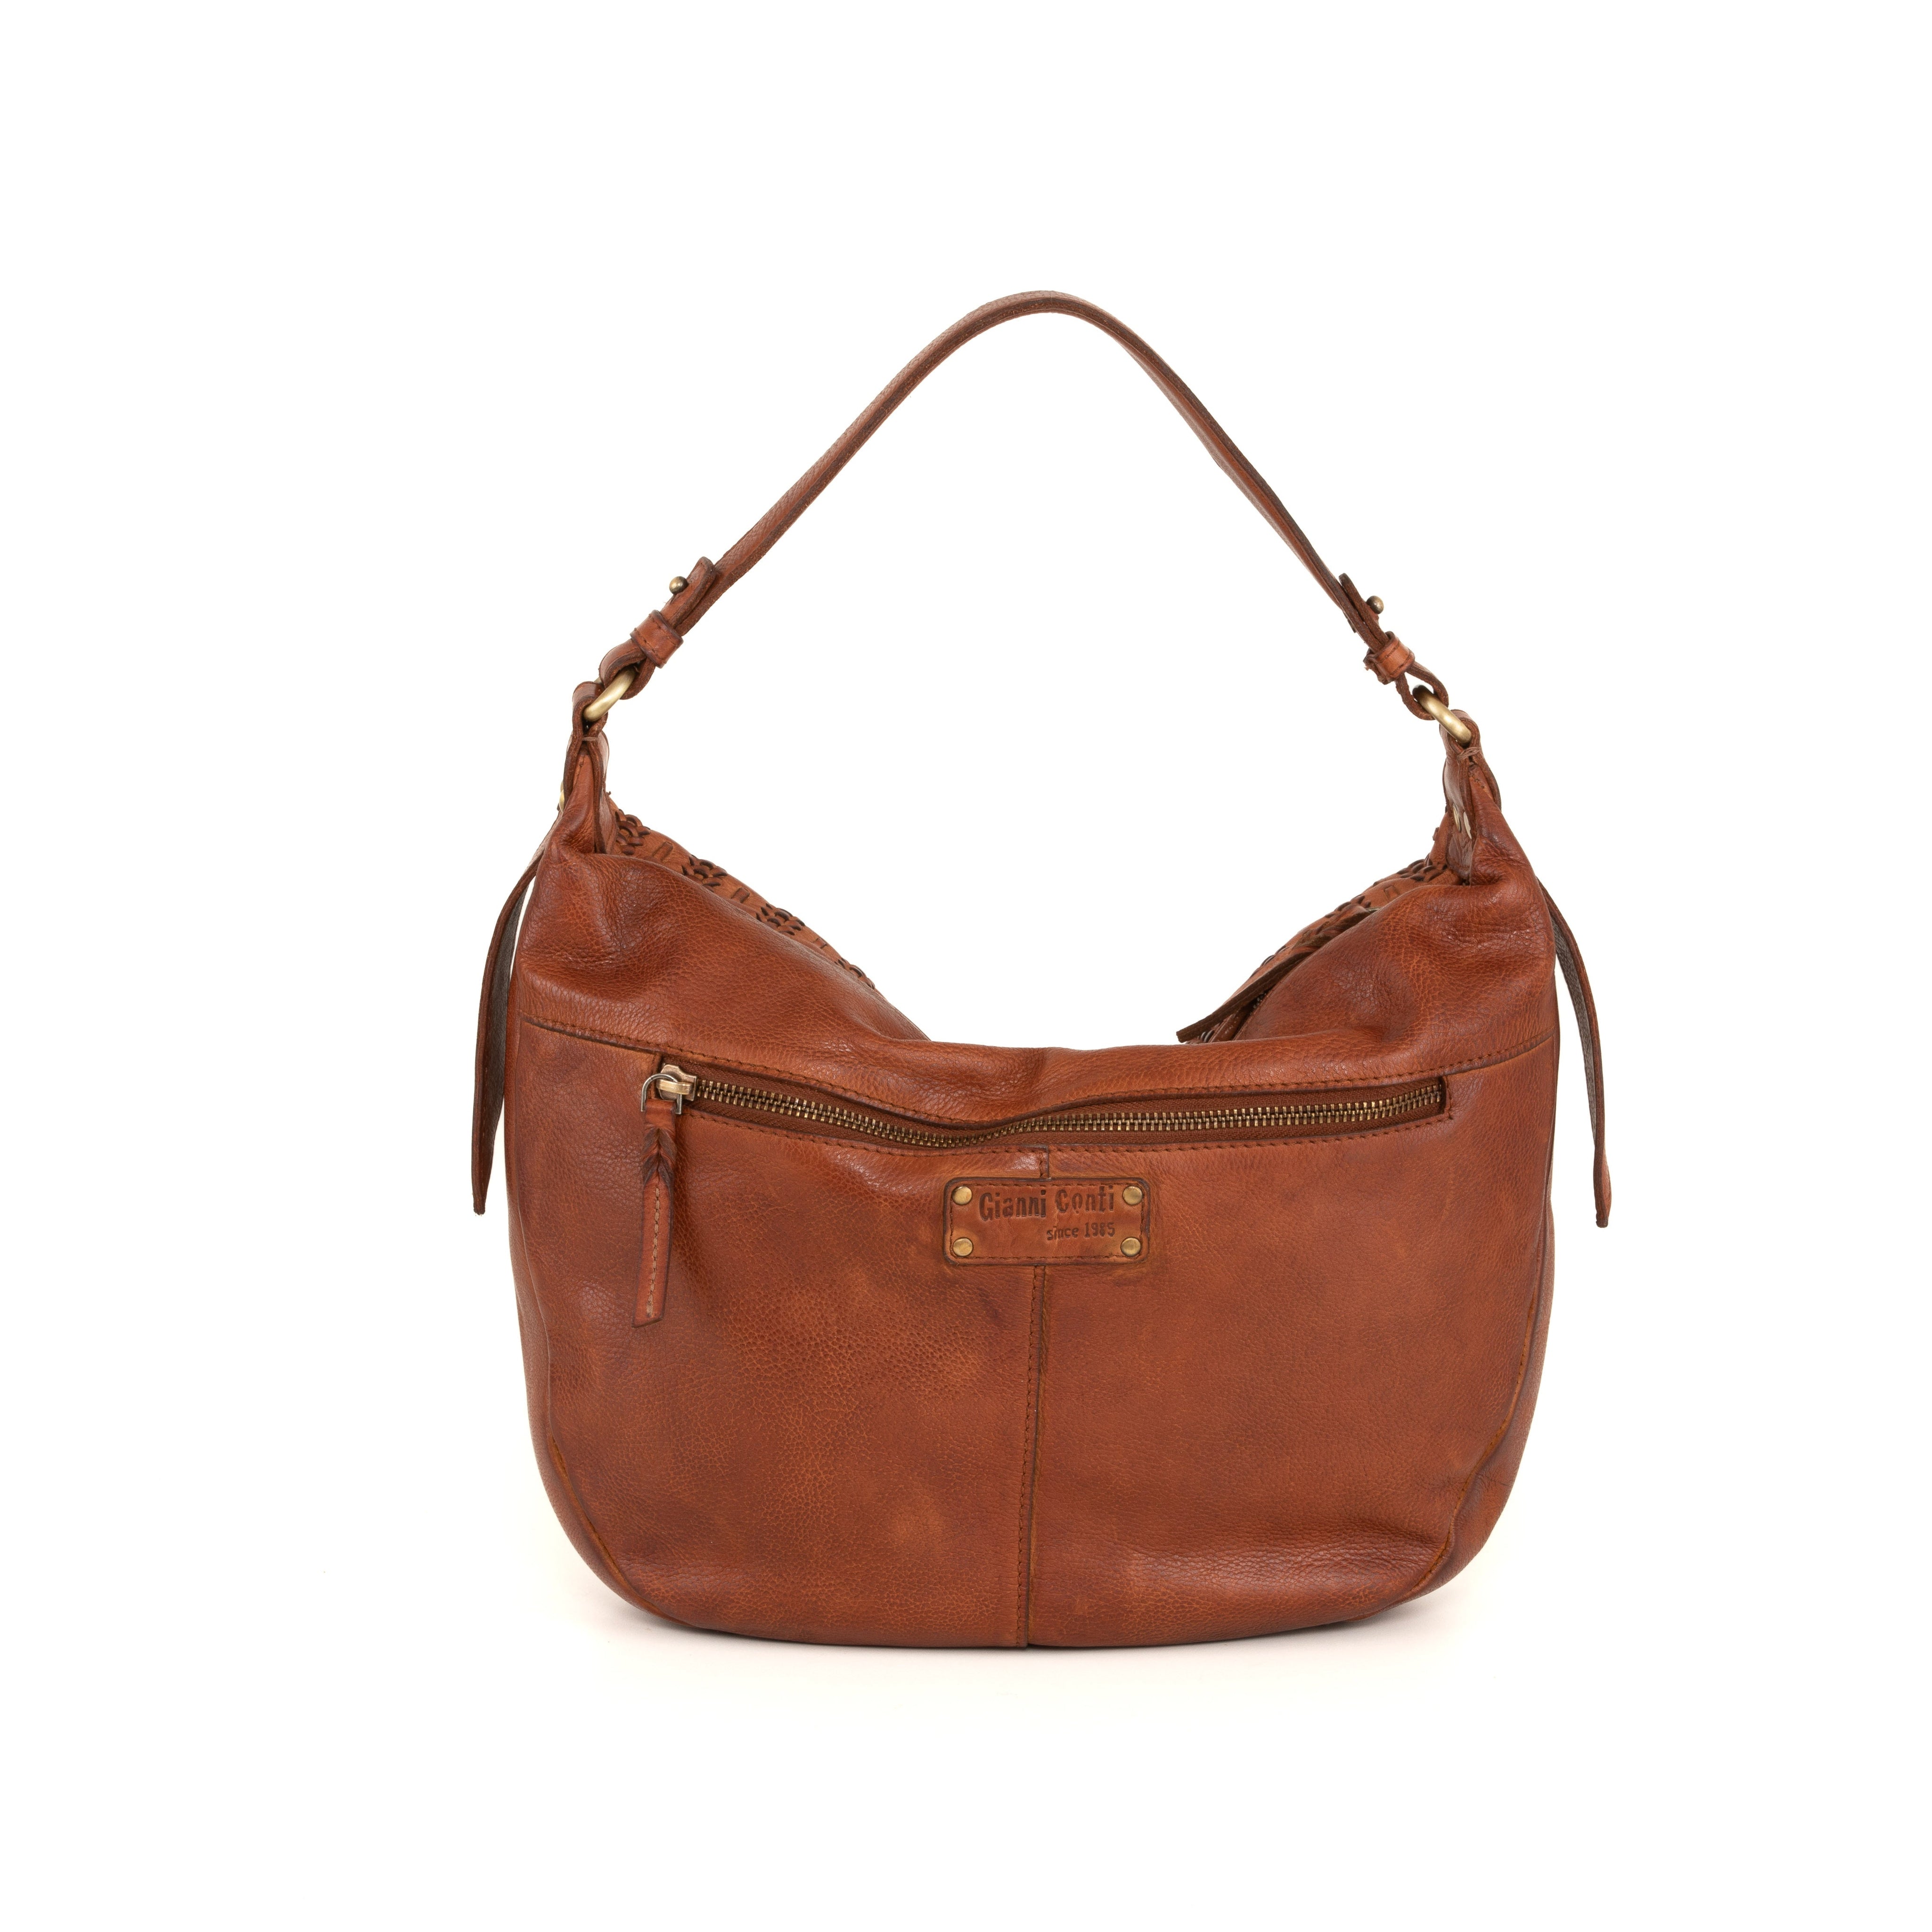 TOBY by Gianni Conti - Italian Leather Shoulder Bag